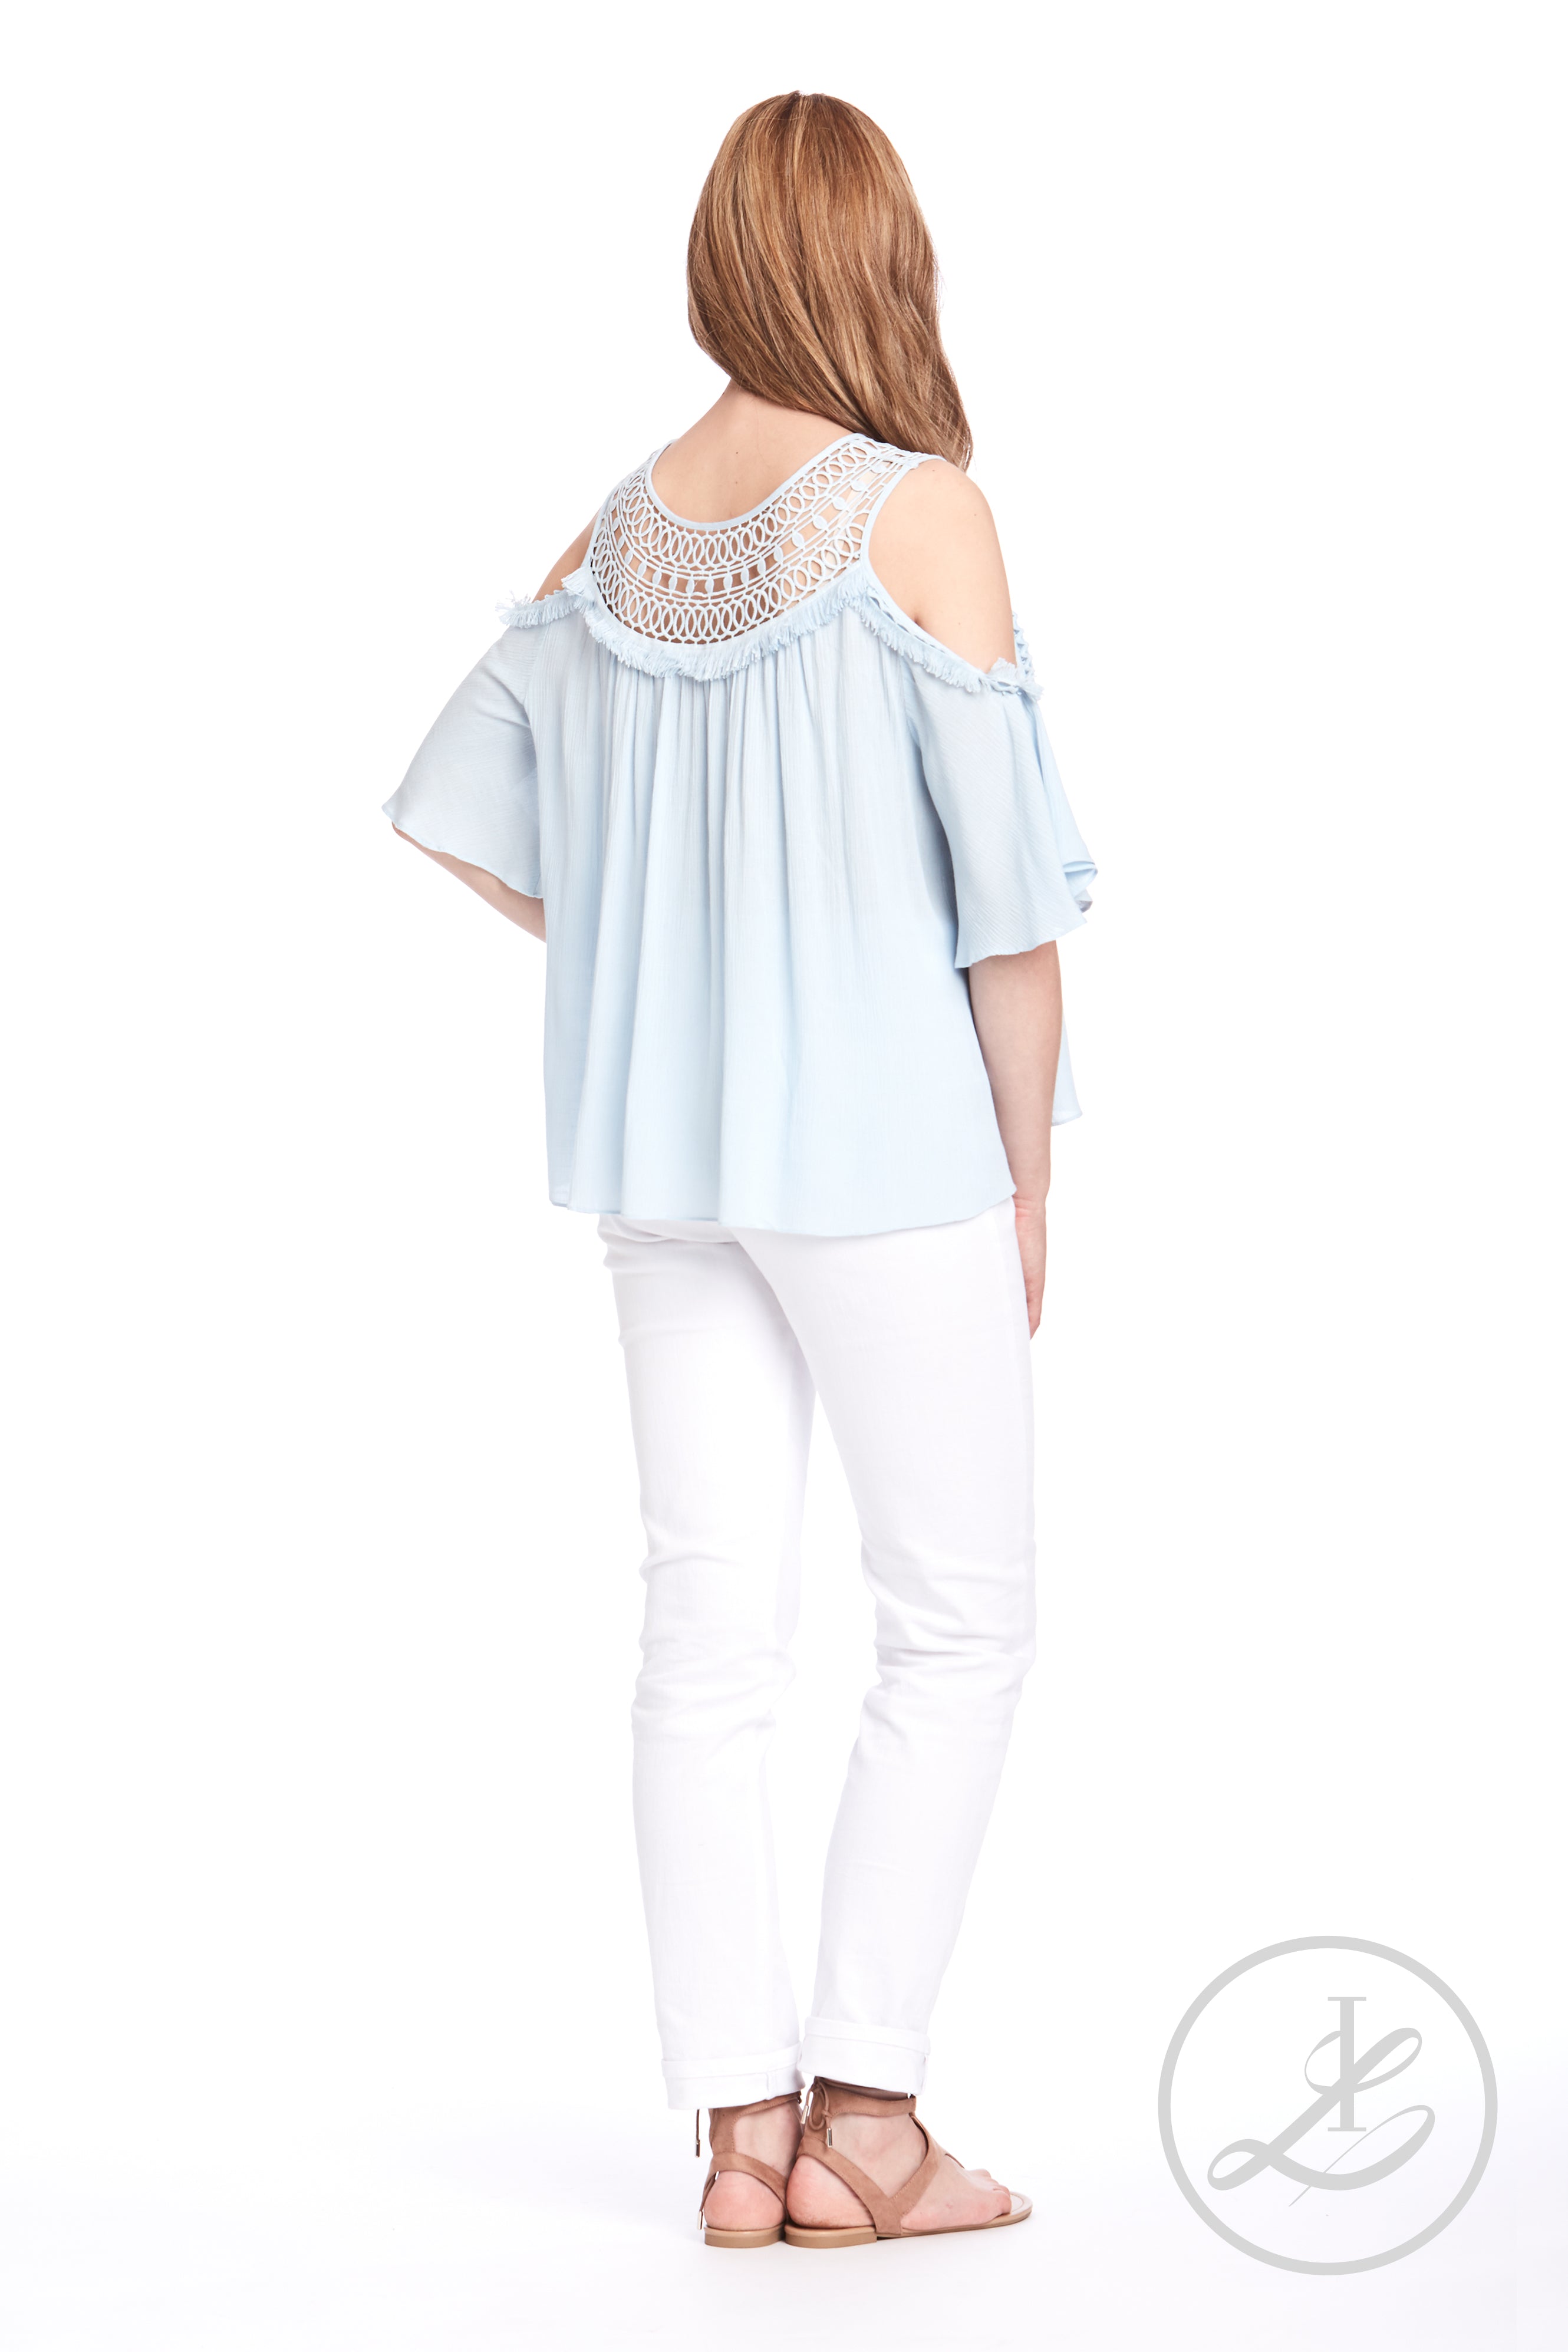 IL81034 (Pullover Top Only)